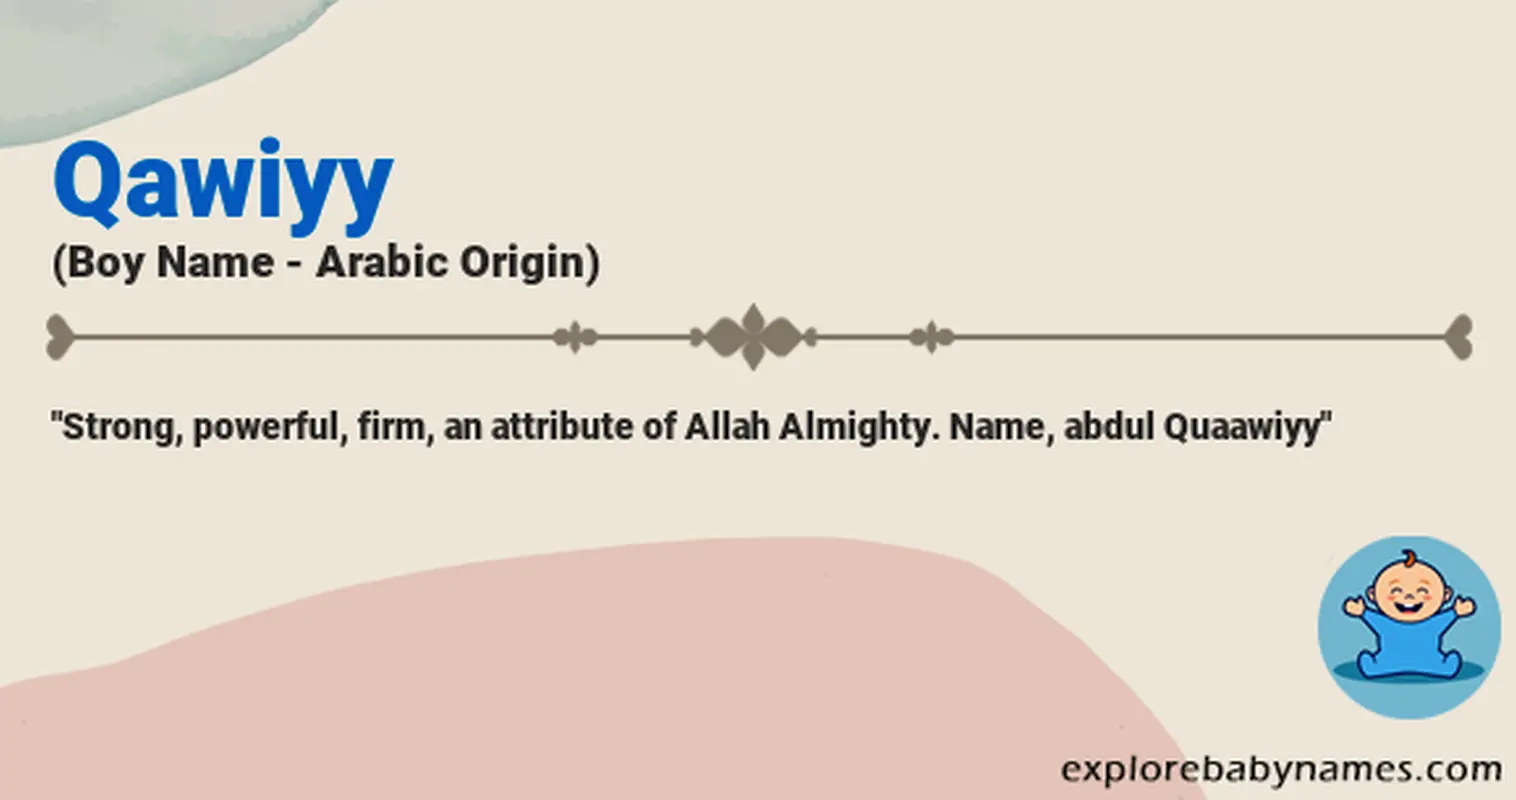 Meaning of Qawiyy